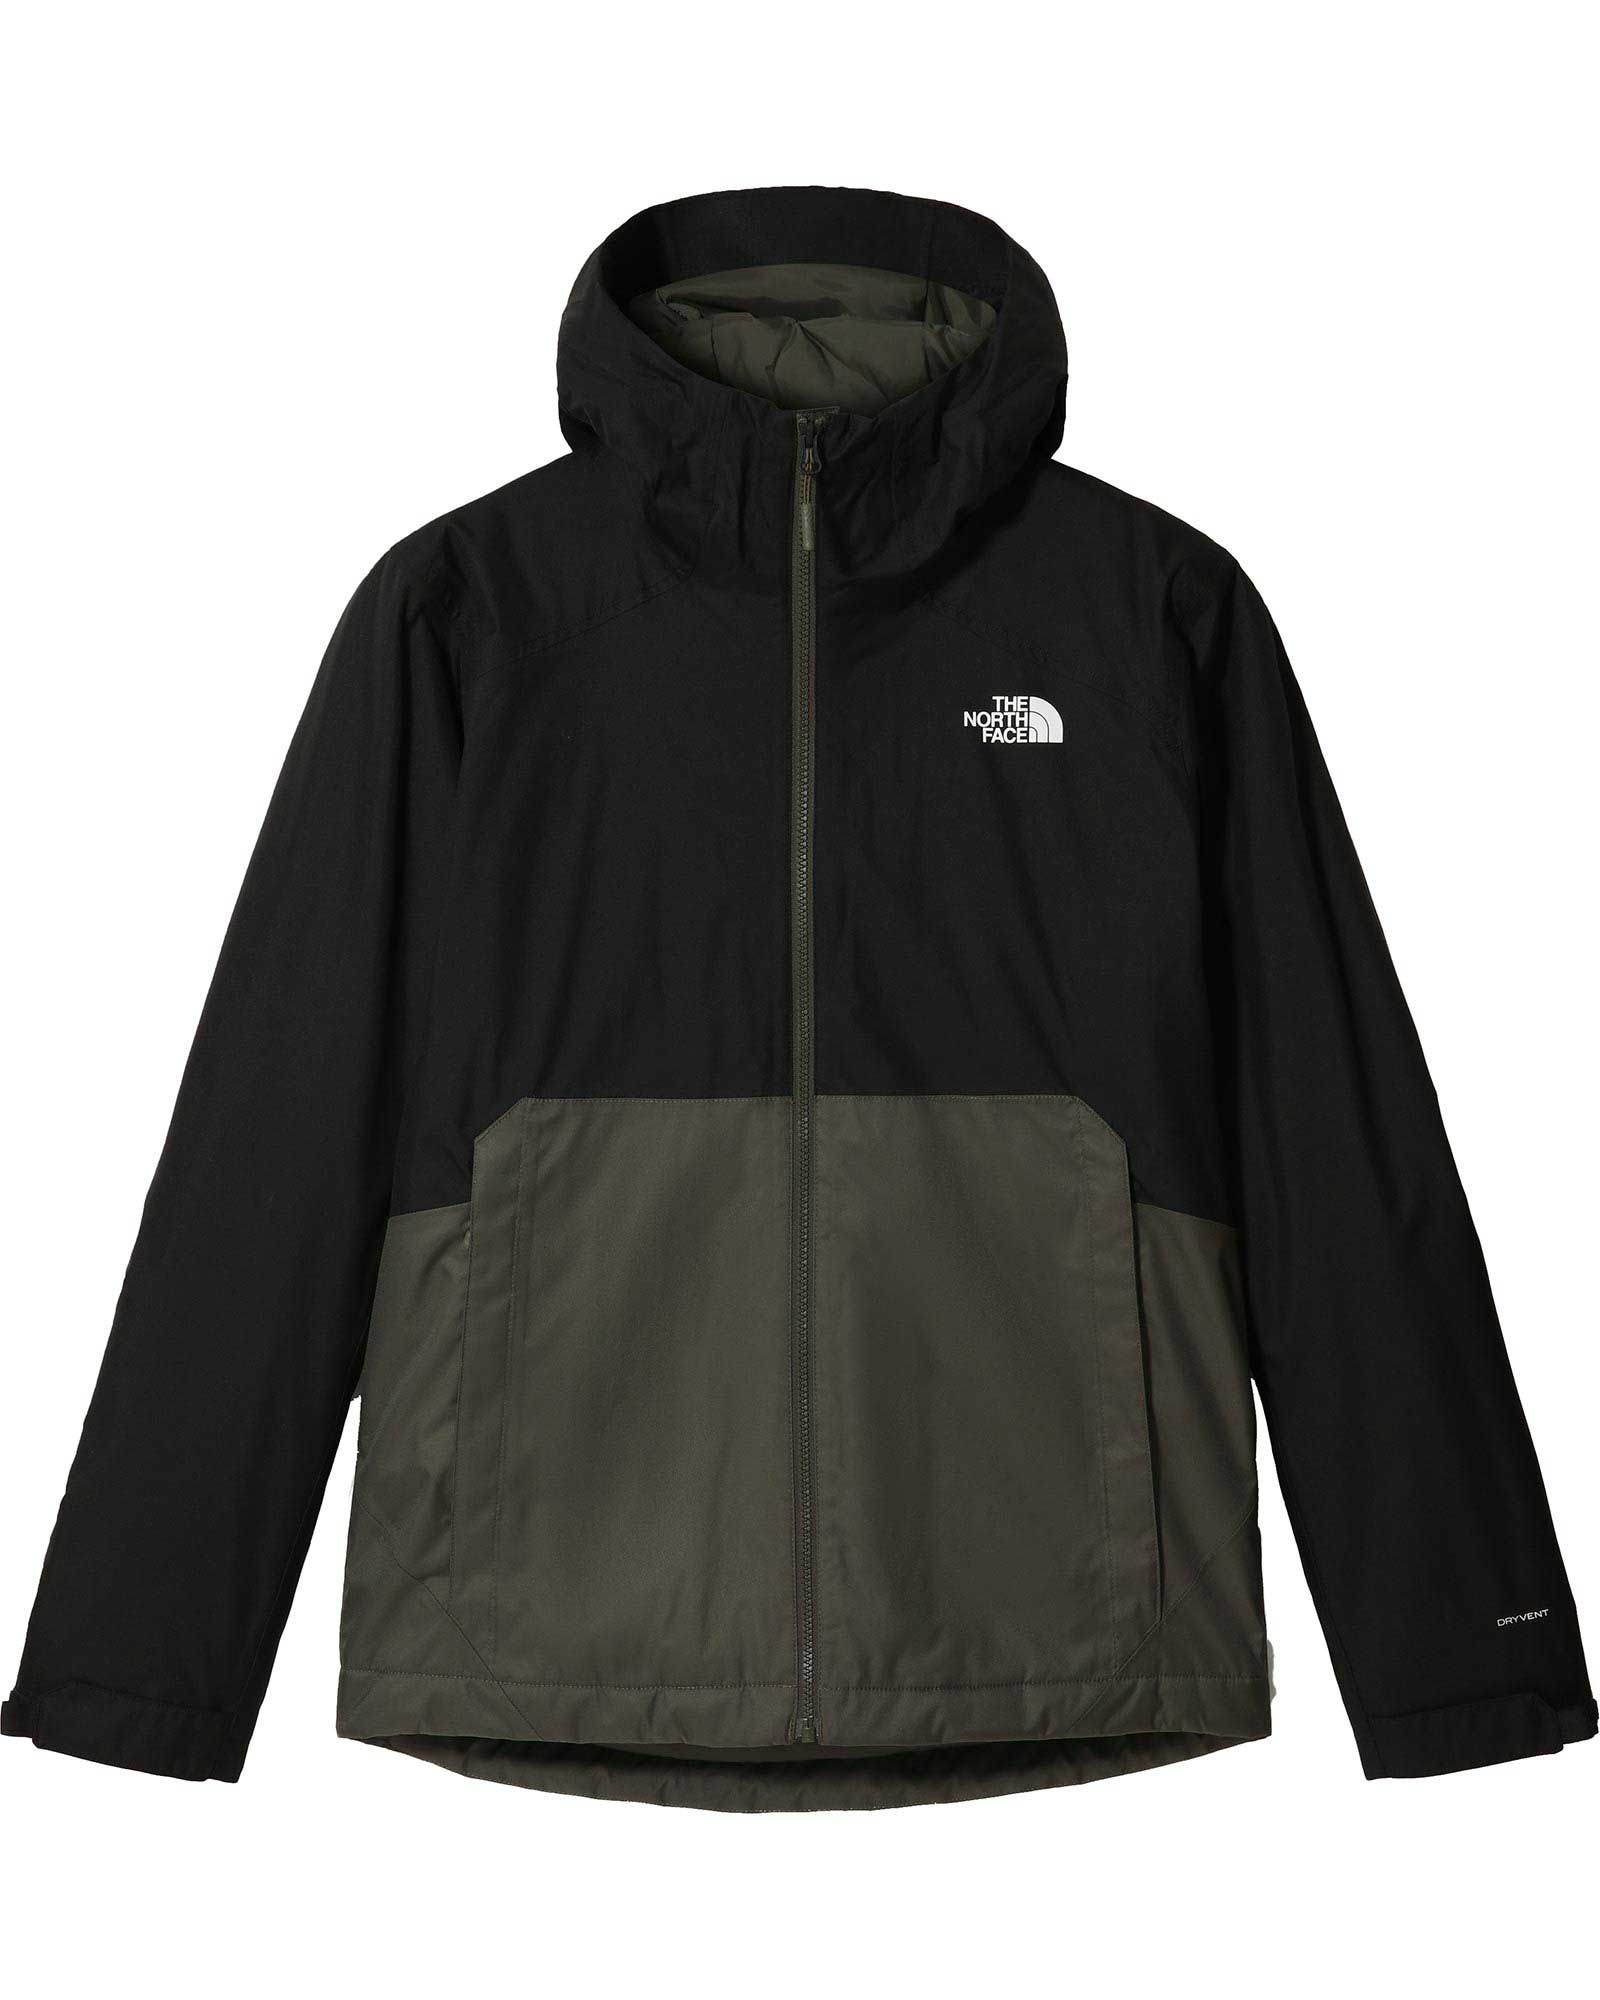 The North Face Millerton DryVent Men’s Insulated Jacket - New Taupe Green S